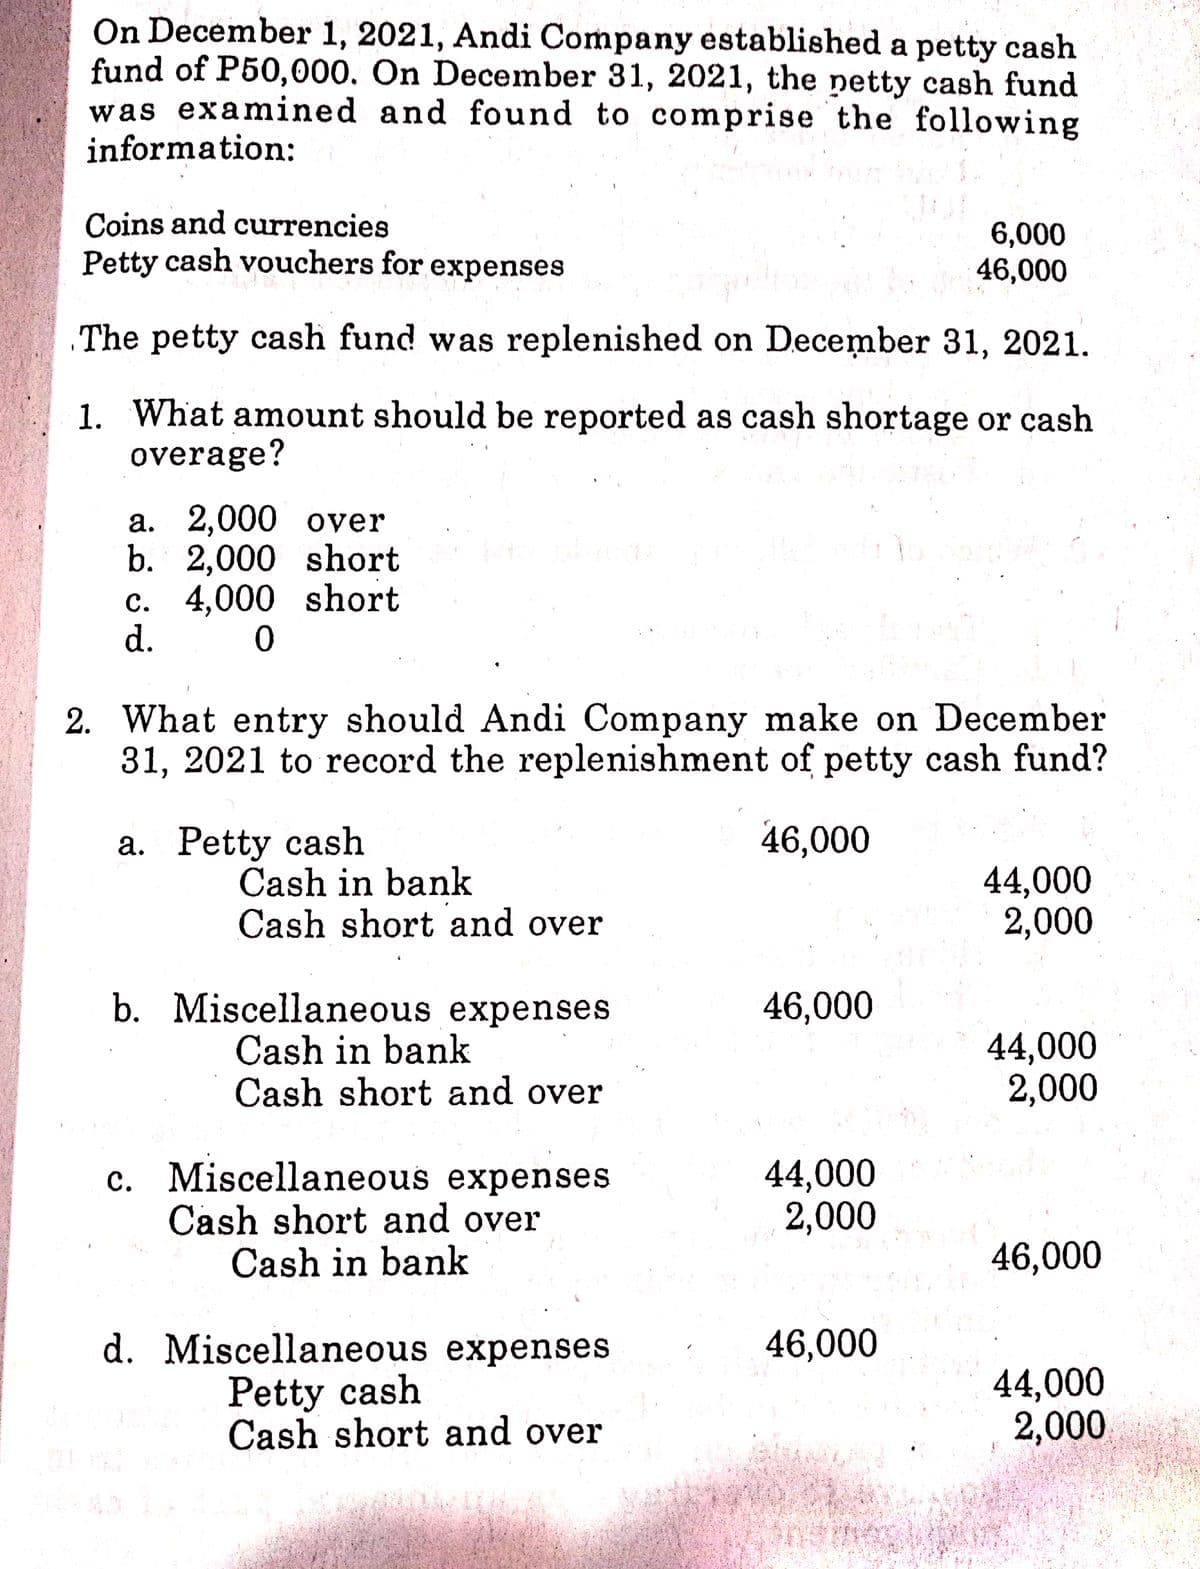 On December 1, 2021, Andi Company established a petty cash
fund of P50,000. On December 31, 2021, the netty cash fund
was examined and found to comprise the following
information:
Coins and currencies
Petty cash vouchers for expenses
6,000
46,000
The petty cash fund was replenished on December 31, 2021.
1. What amount should be reported as cash shortage or cash
overage?
a. 2,000 over
b. 2,000 short
c. 4,000 short
d.
2. What entry should Andi Company make on December
31, 2021 to record the replenishment of petty cash fund?
a. Petty cash
46,000
Cash in bank
Cash short and over
44,000
2,000
b. Miscellaneous expenses
Cash in bank
Cash short and over
46,000
44,000
2,000
c. Miscellaneous expenses
Cash short and over
Cash in bank
44,000
2,000
46,000
d. Miscellaneous expenses
Petty cash
Cash short and over
46,000
44,000
2,000
